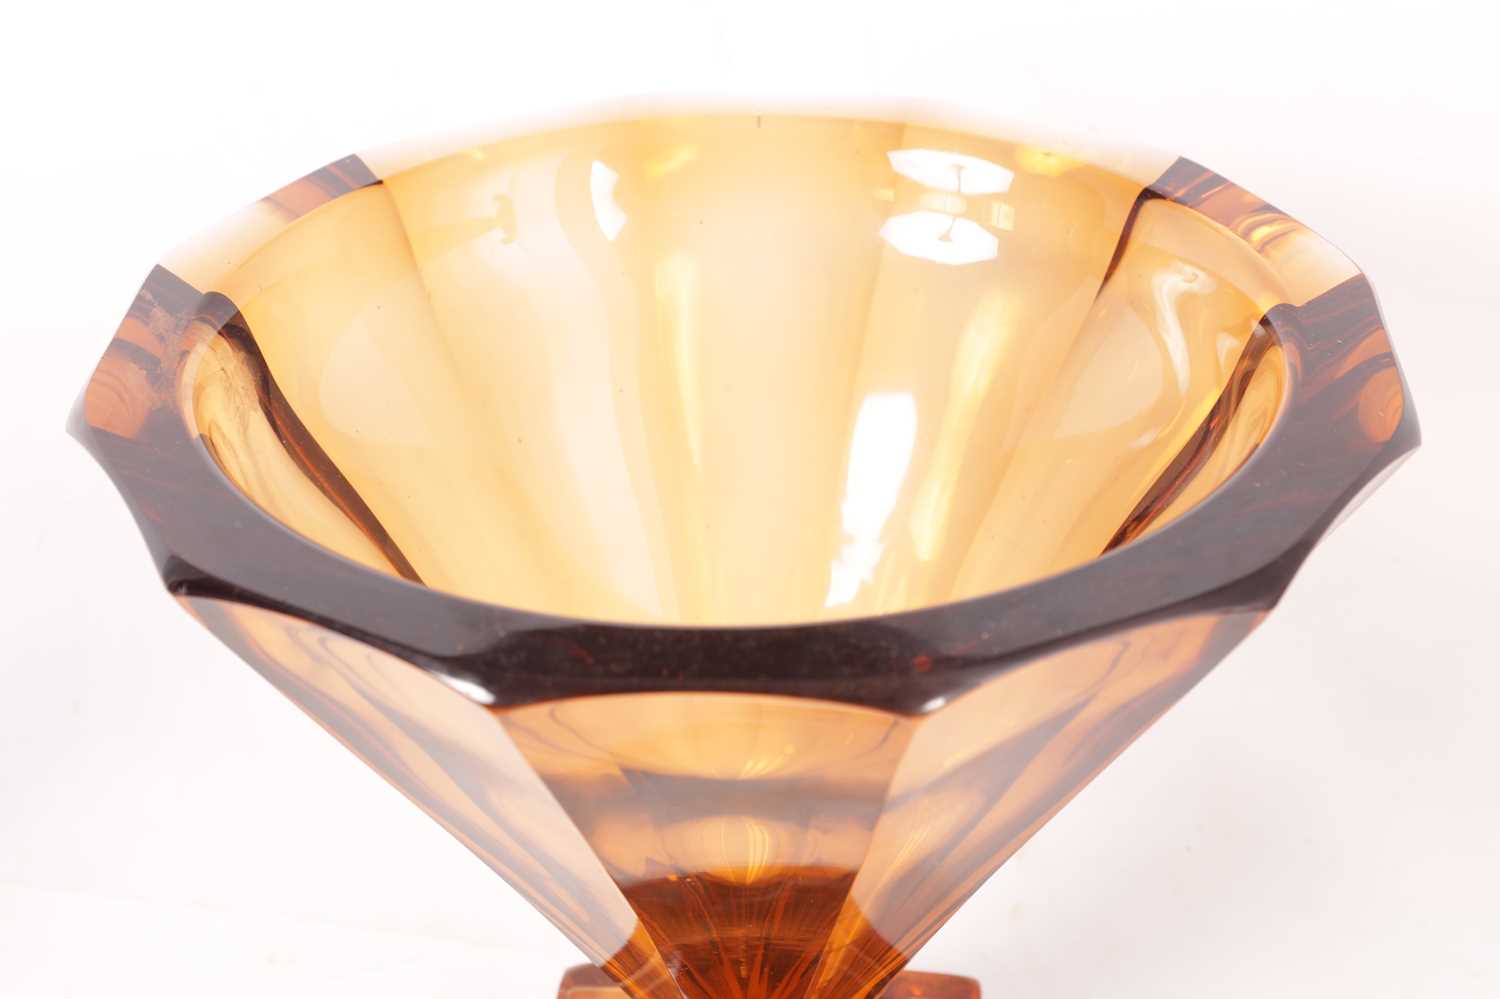 A LARGE FRENCH ART DECO DAUM NANCY AMBER GLASS VASE - Image 4 of 5